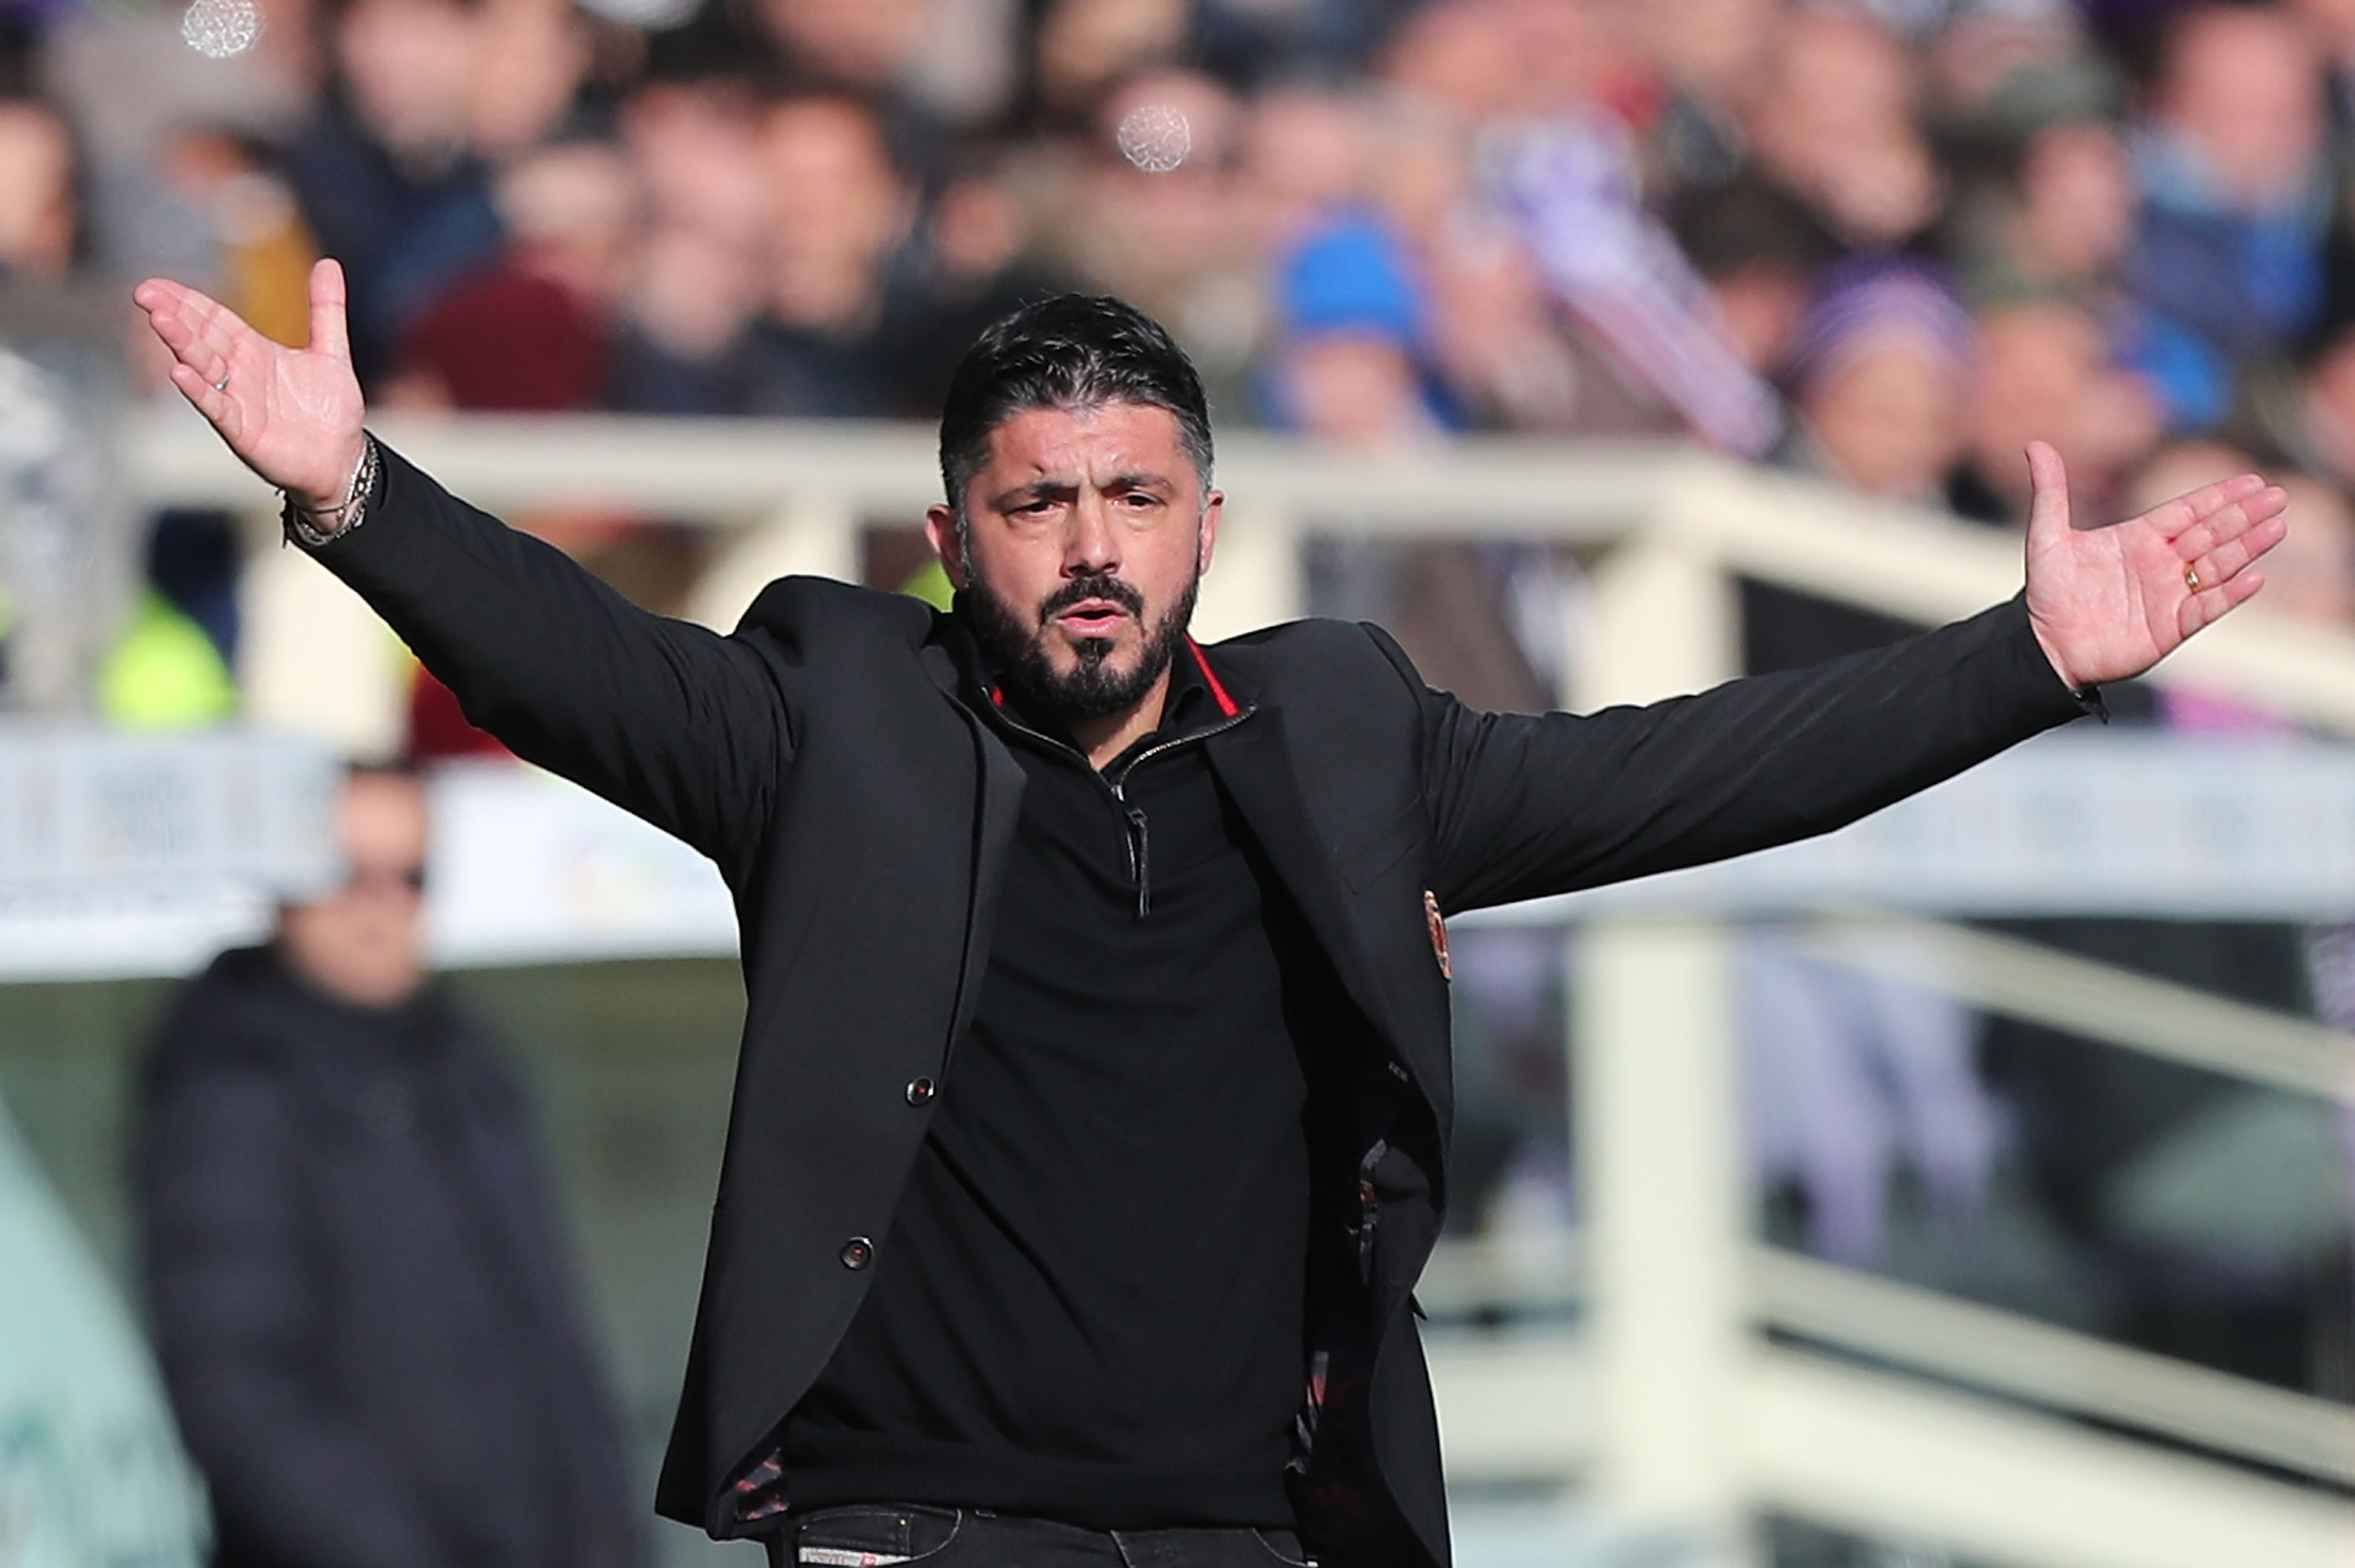 FLORENCE, ITALY - DECEMBER 30: Gennaro Gattuso manager of AC Milan gestures during the serie A match between ACF Fiorentina and AC Milan at Stadio Artemio Franchi on December 30, 2017 in Florence, Italy.  (Photo by Gabriele Maltinti/Getty Images)